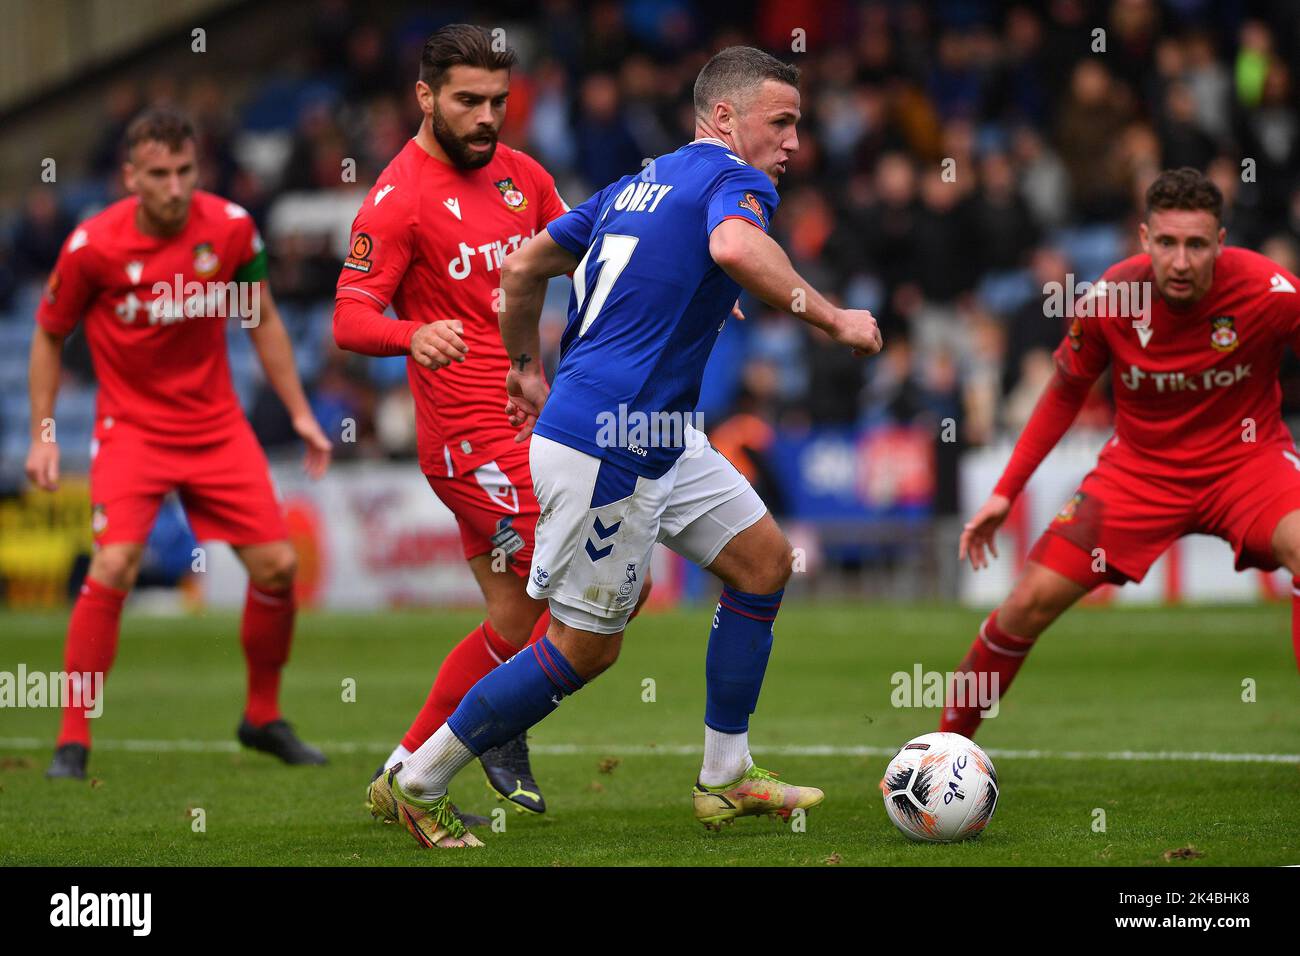 Oldham, UK. 1st October 2022during the Vanarama National League match between Oldham Athletic and Wrexham at Boundary Park, Oldham on Saturday 1st October 2022John Rooney of Oldham Athletic makes his debut during the Vanarama National League match between Oldham Athletic and Wrexham at Boundary Park, Oldham on Saturday 1st October 2022during the Vanarama National League match between Oldham Athletic and Wrexham at Boundary Park, Oldham on Saturday 1st October 2022. Credit: MI News & Sport /Alamy Live News Stock Photo